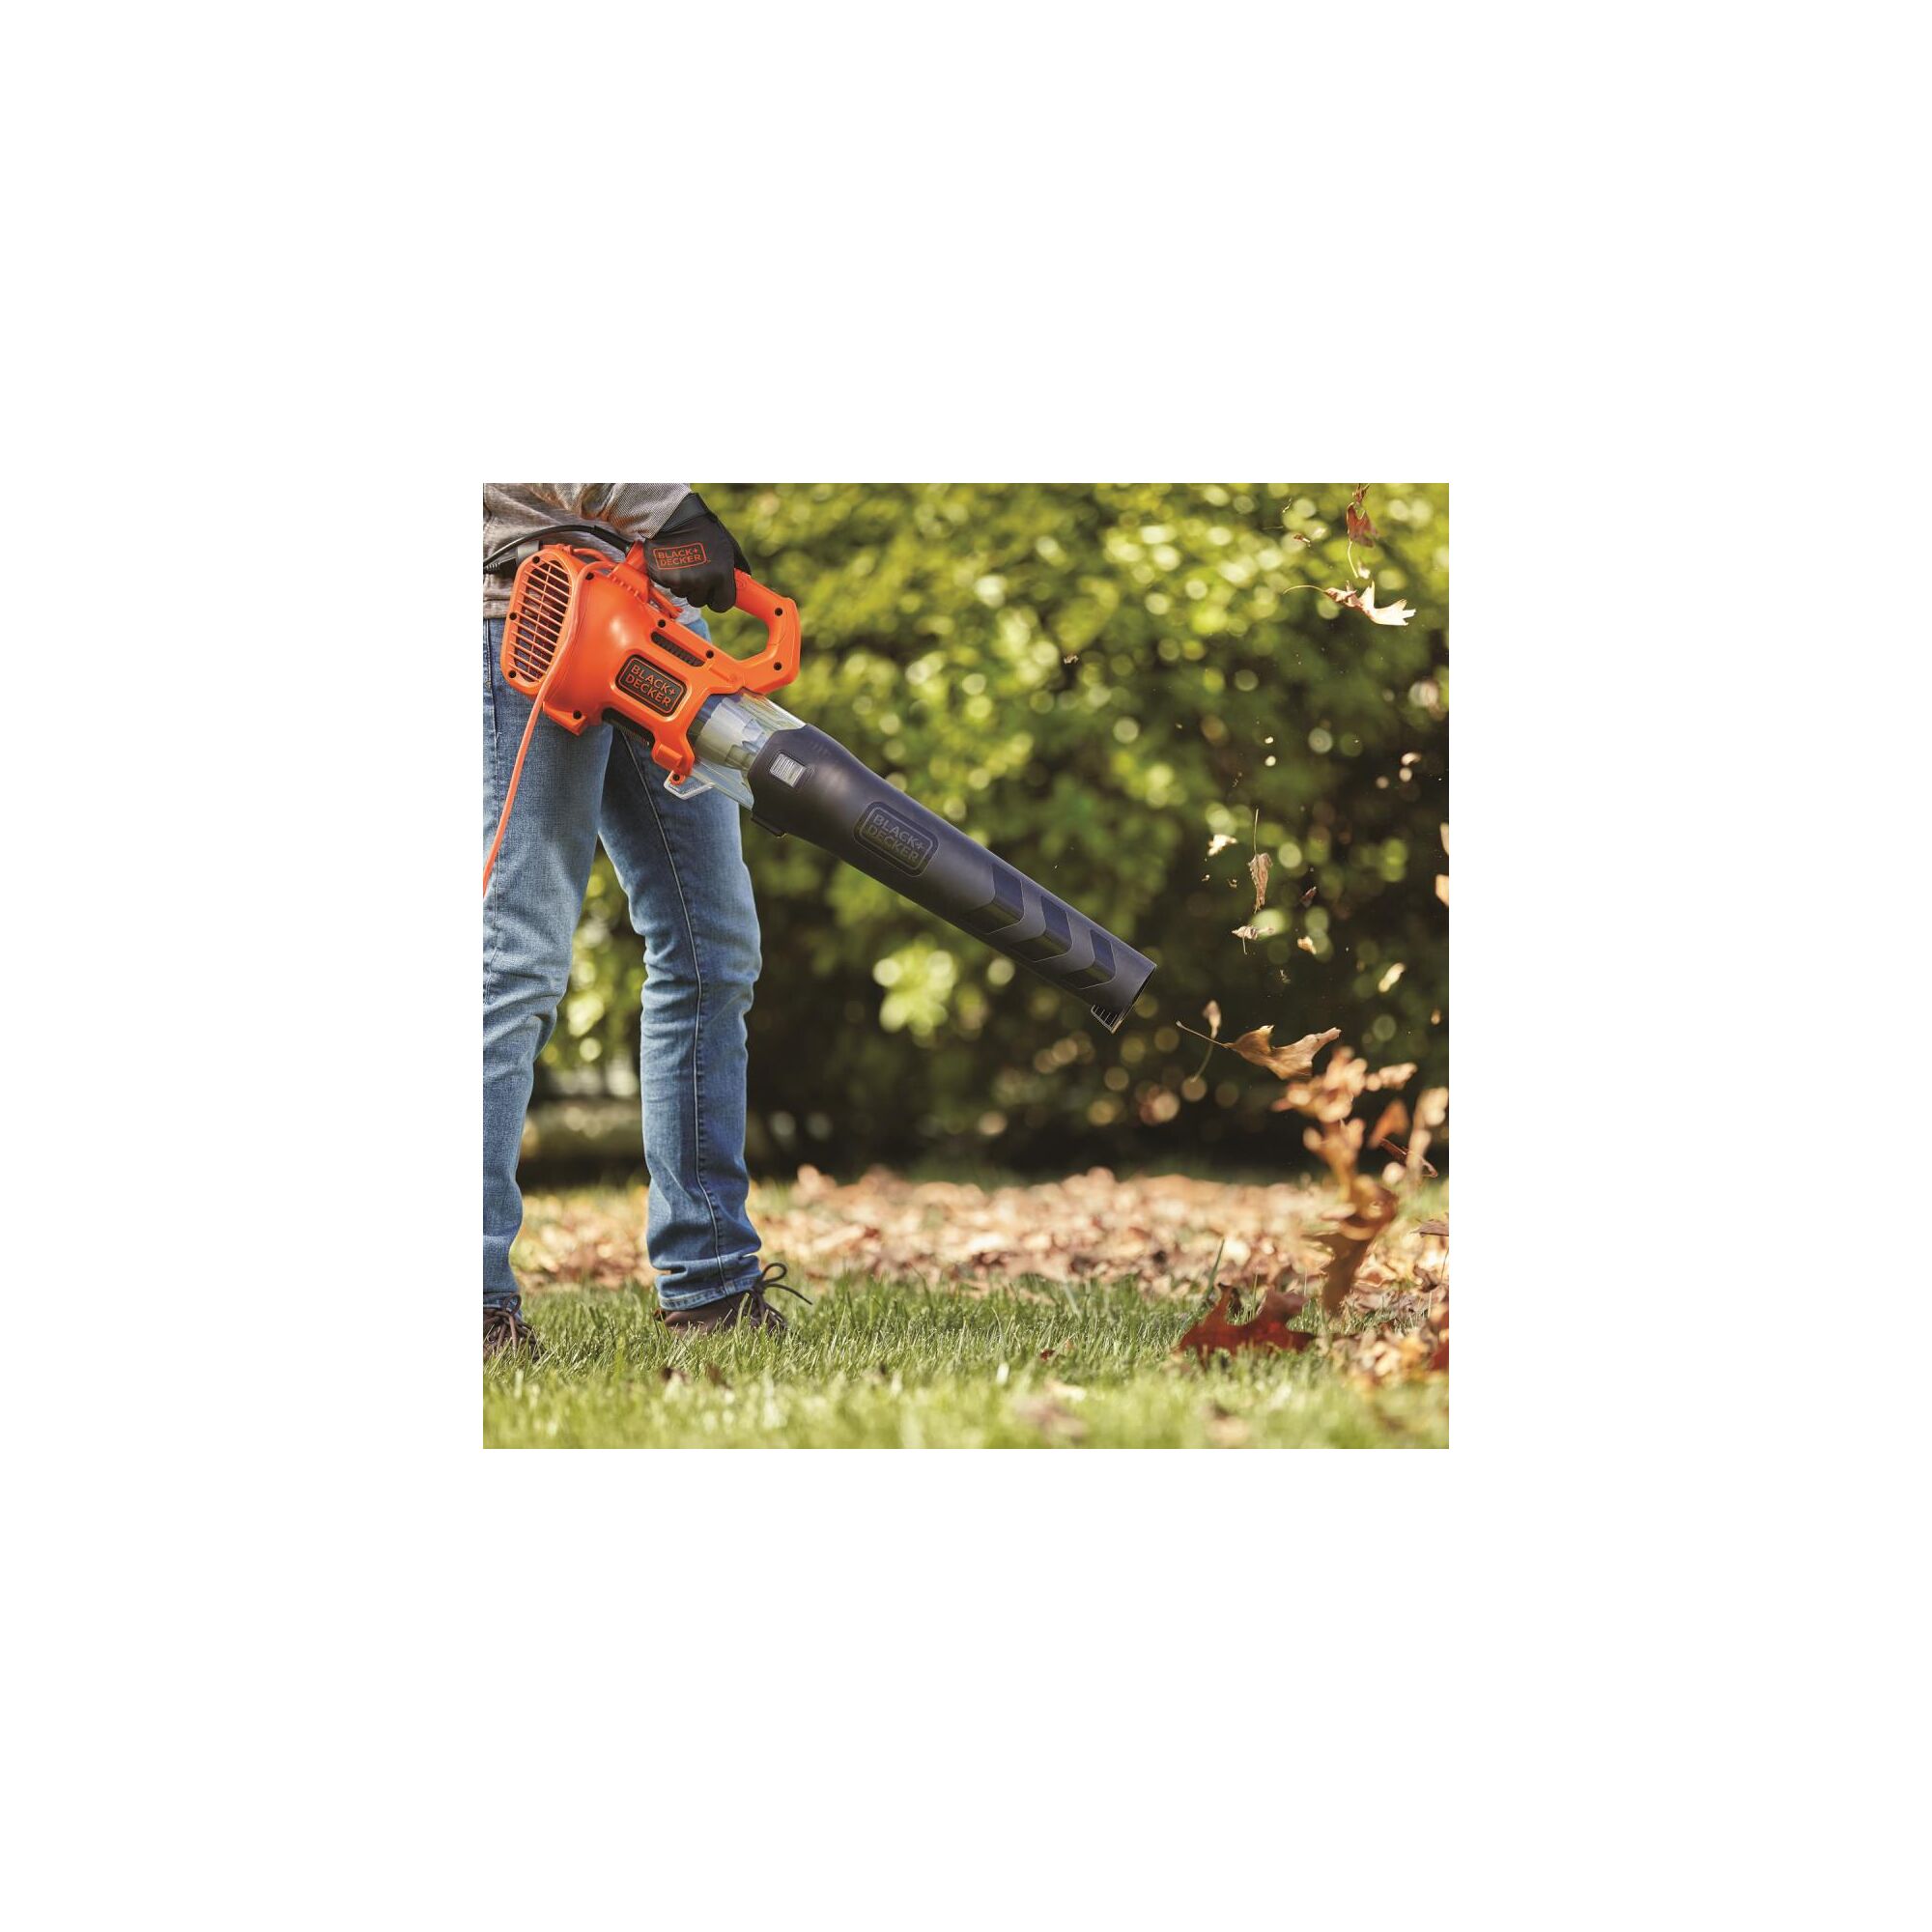 Electric axial leaf blower clearing debris.